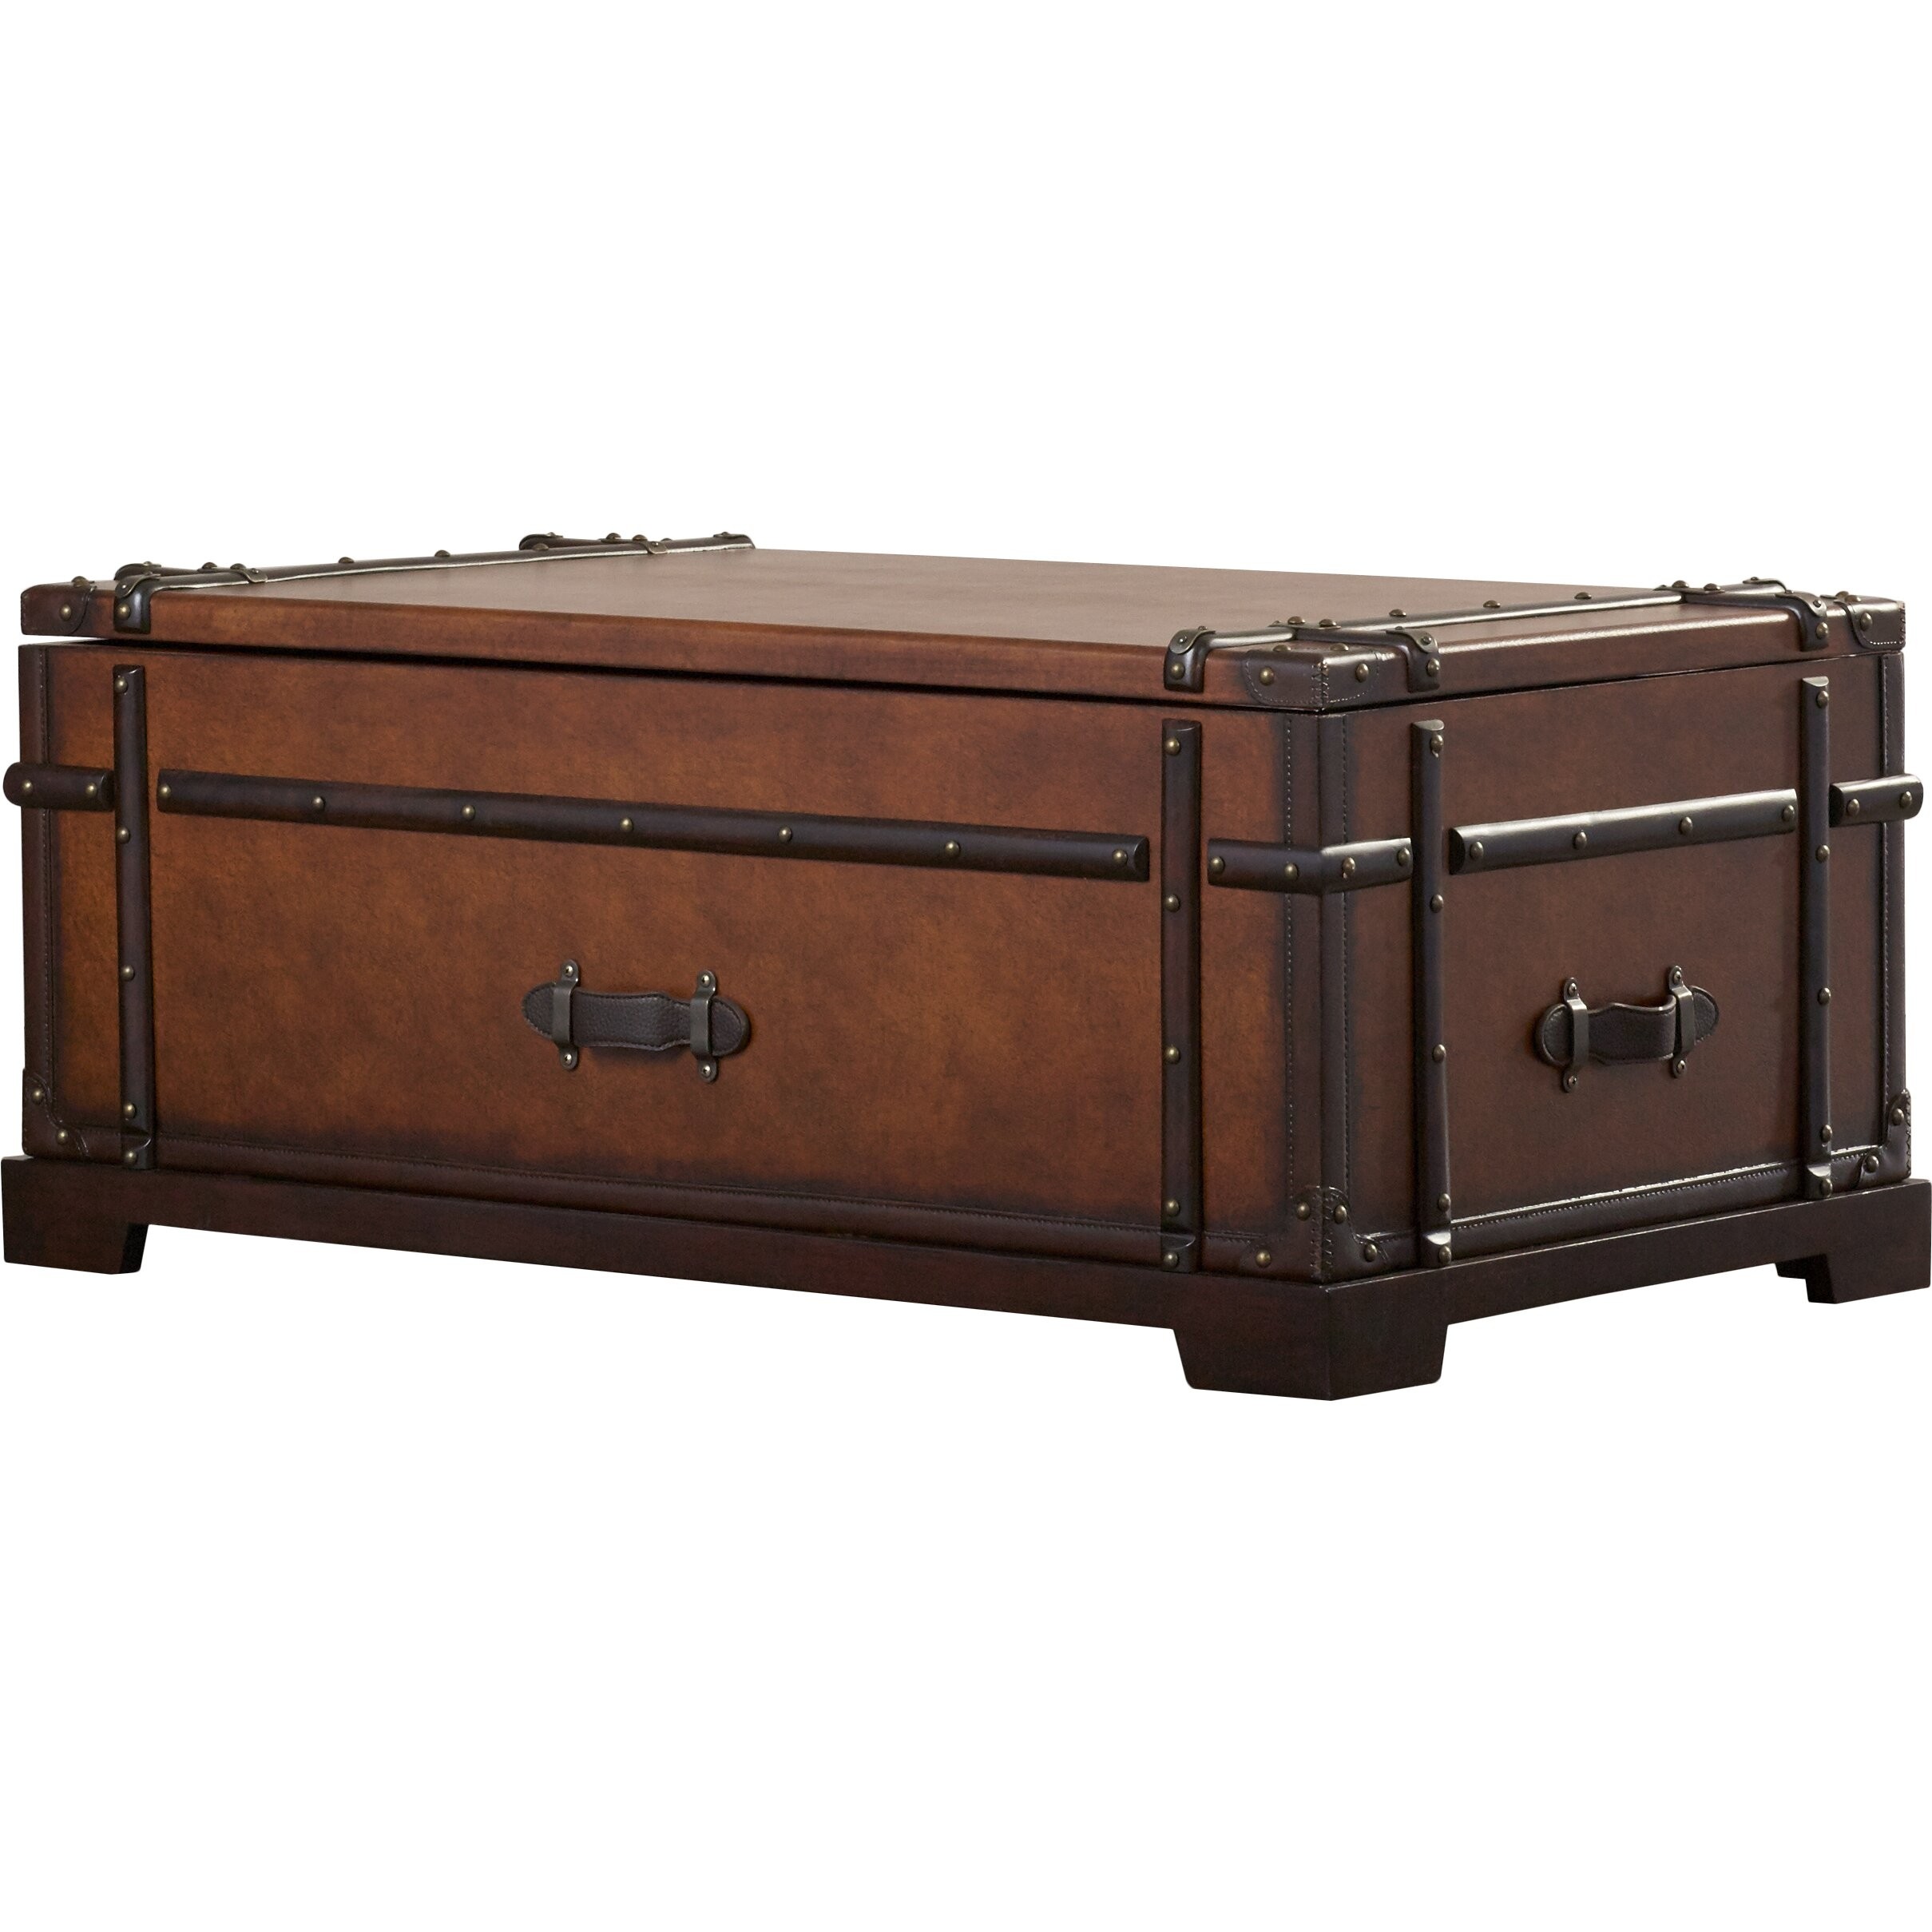 Darby home co delavan steamer coffee table trunk with lift